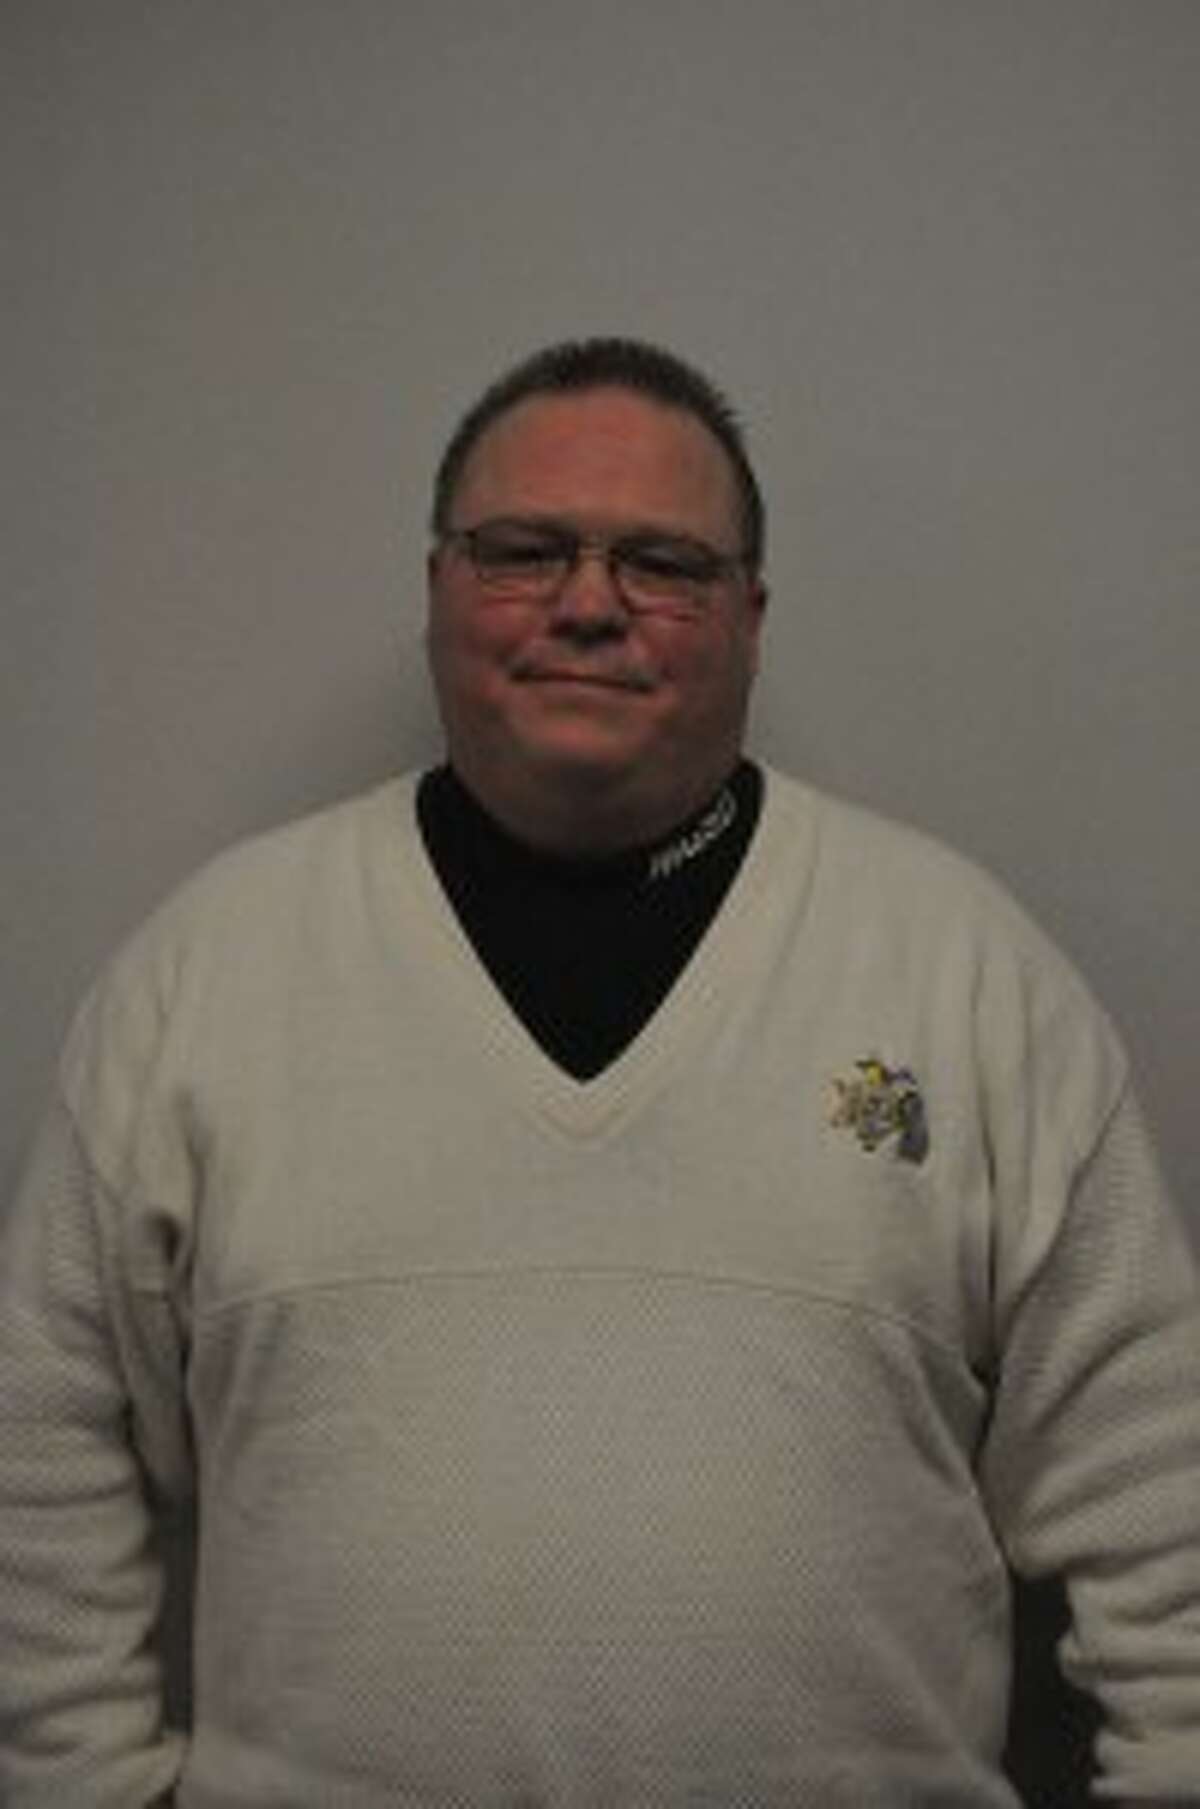 Manistee County Jail Administrator Bob Lancaster is retiring in June after 25 years of service at the jail.